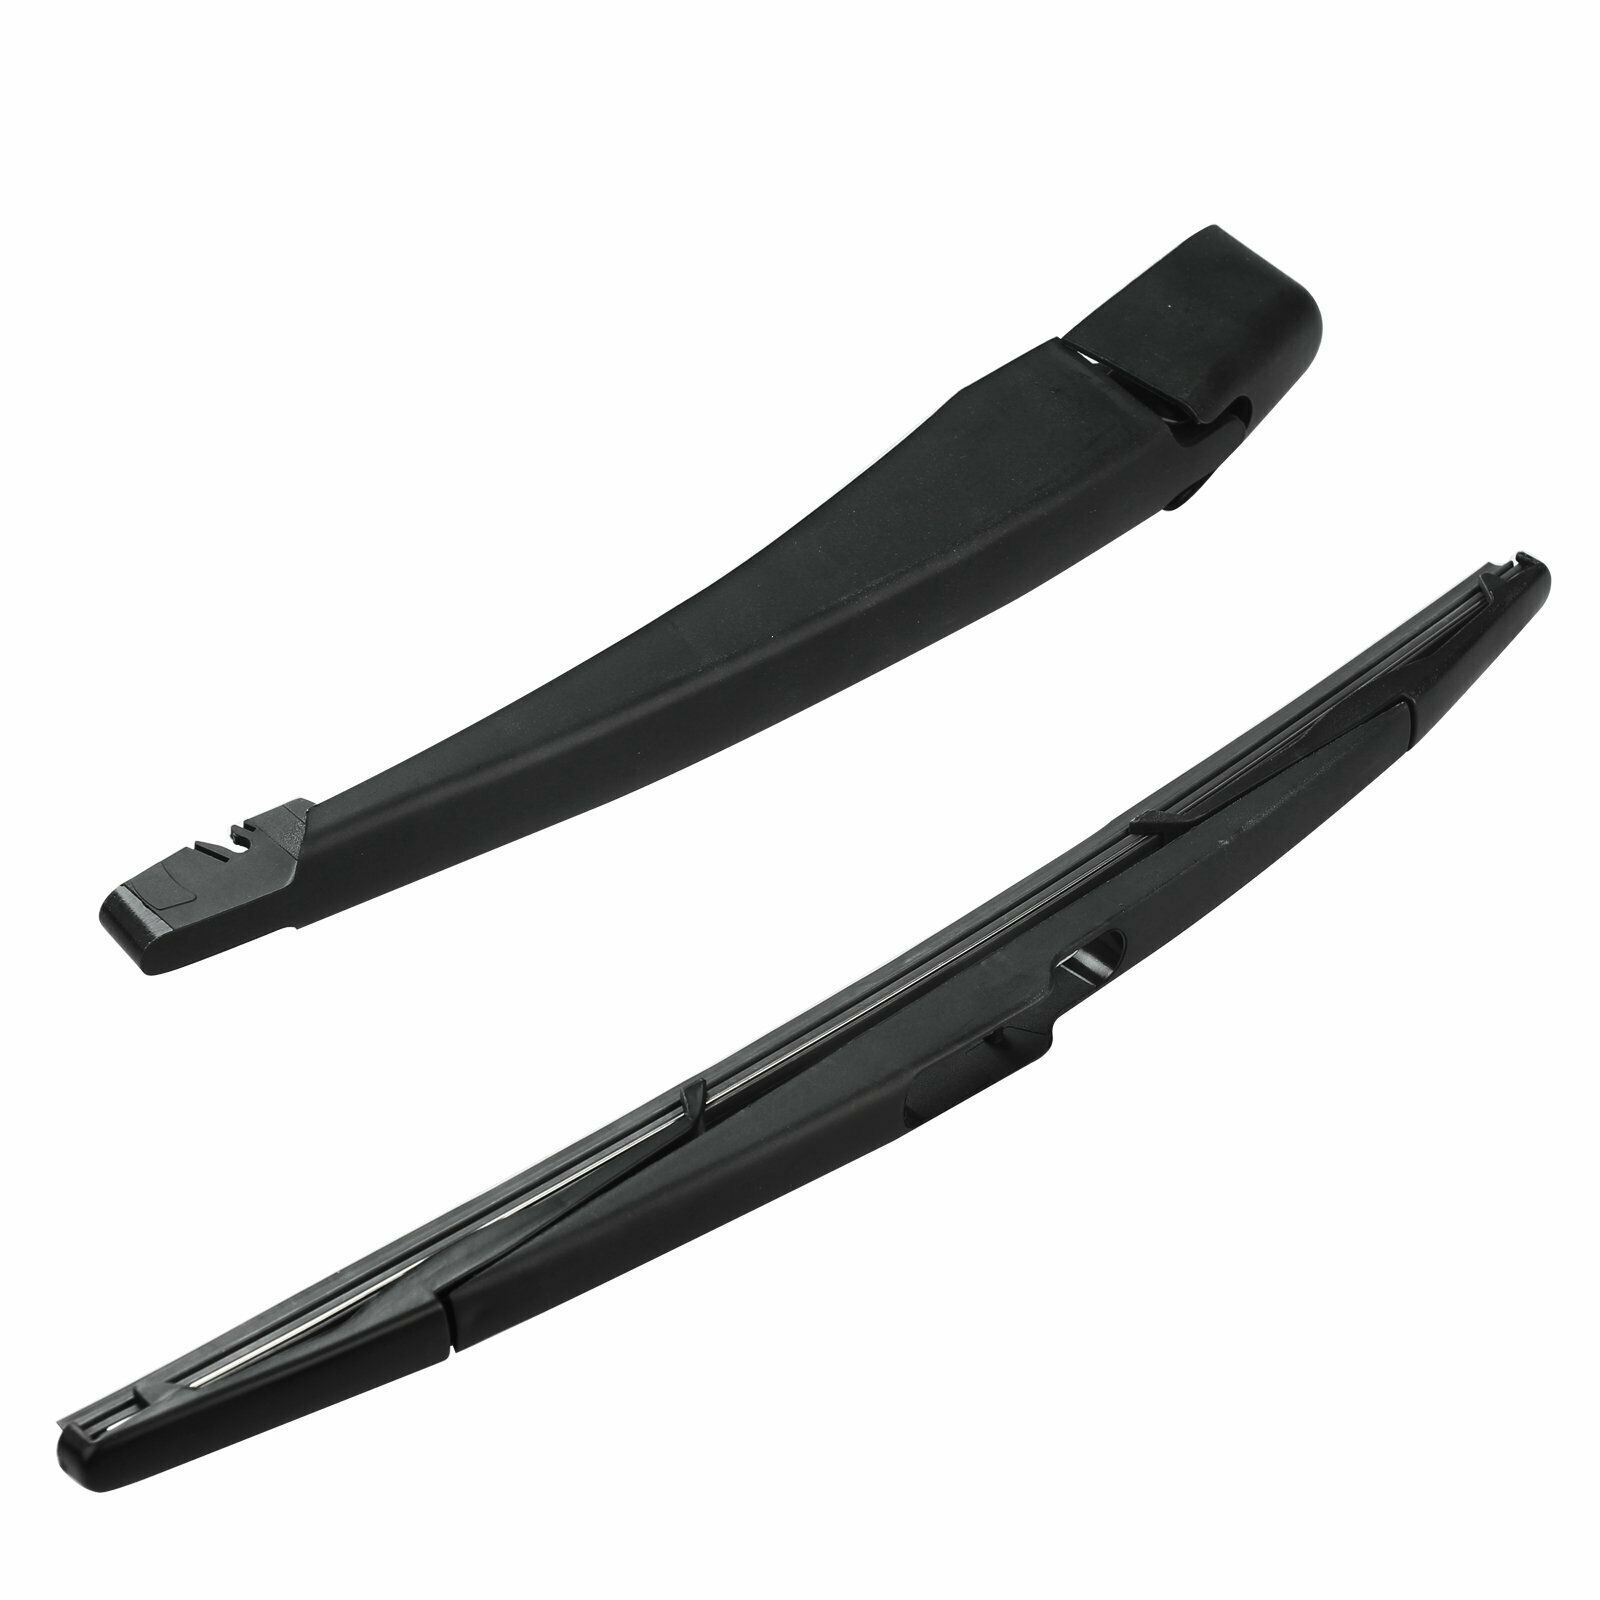 Rear Wiper Arm + Blade Set Fits Dodge Caravan Chrysler Town & Country 2008-2009 - Windshield 2009 Town And Country Wiper Blade Size